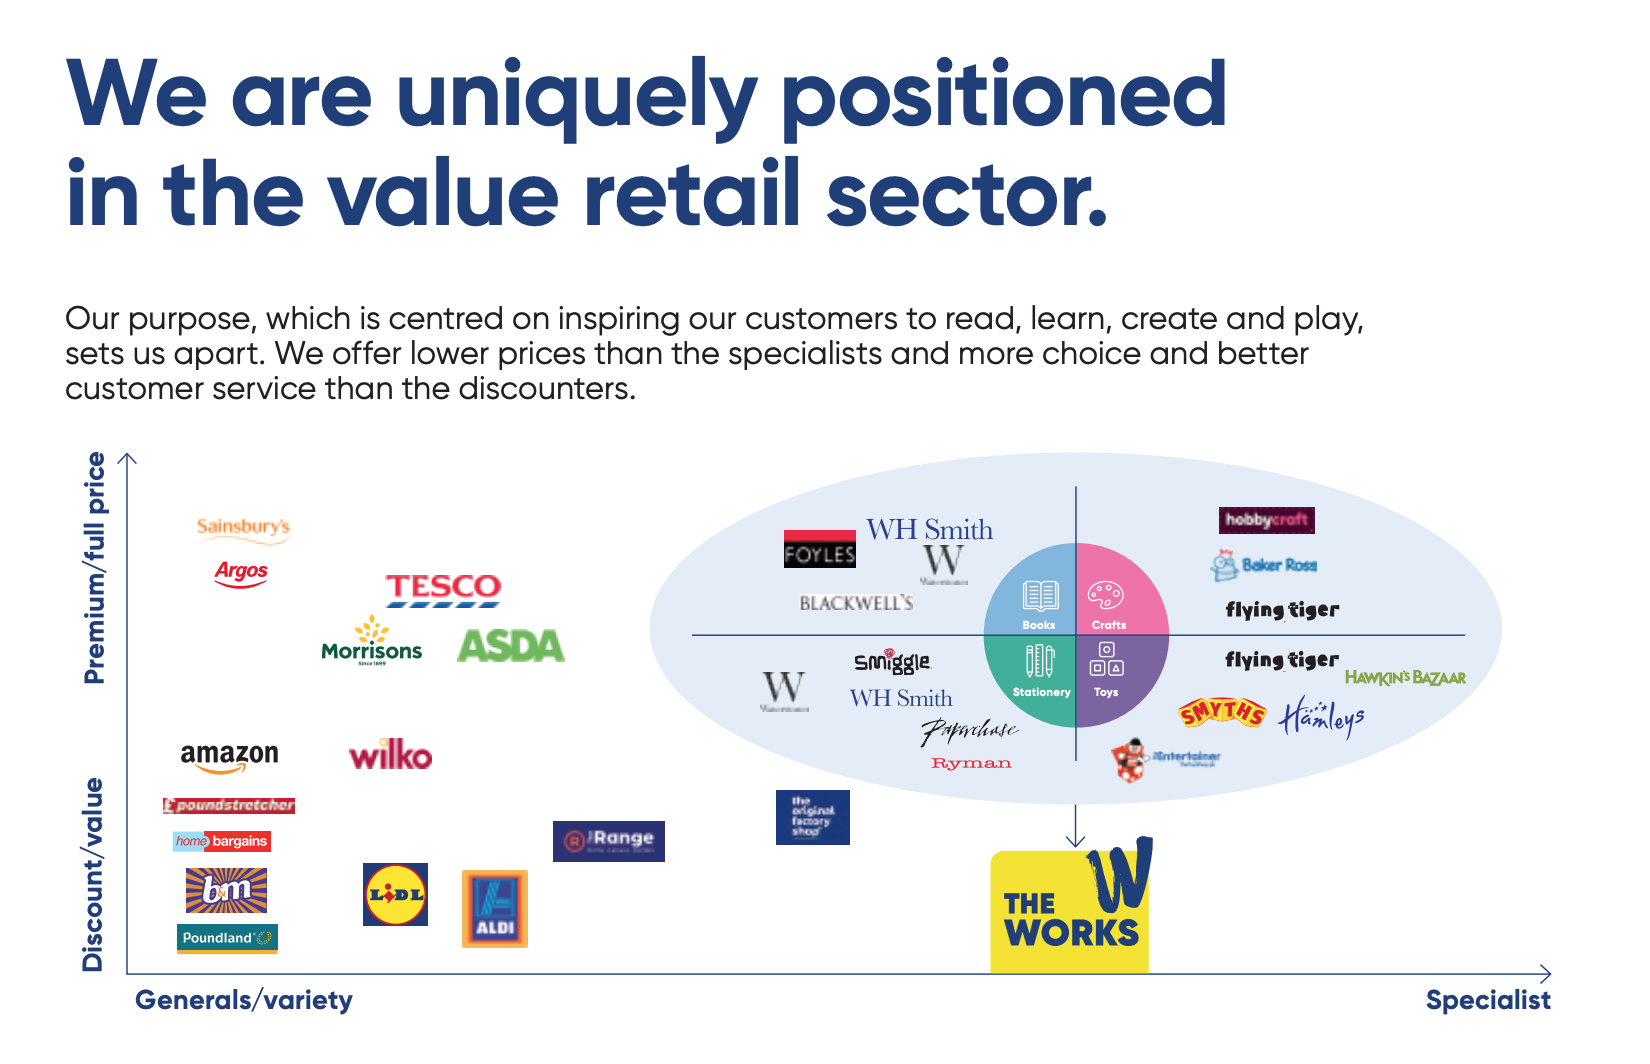 Above: The Works says it has a unique position in the retail sector